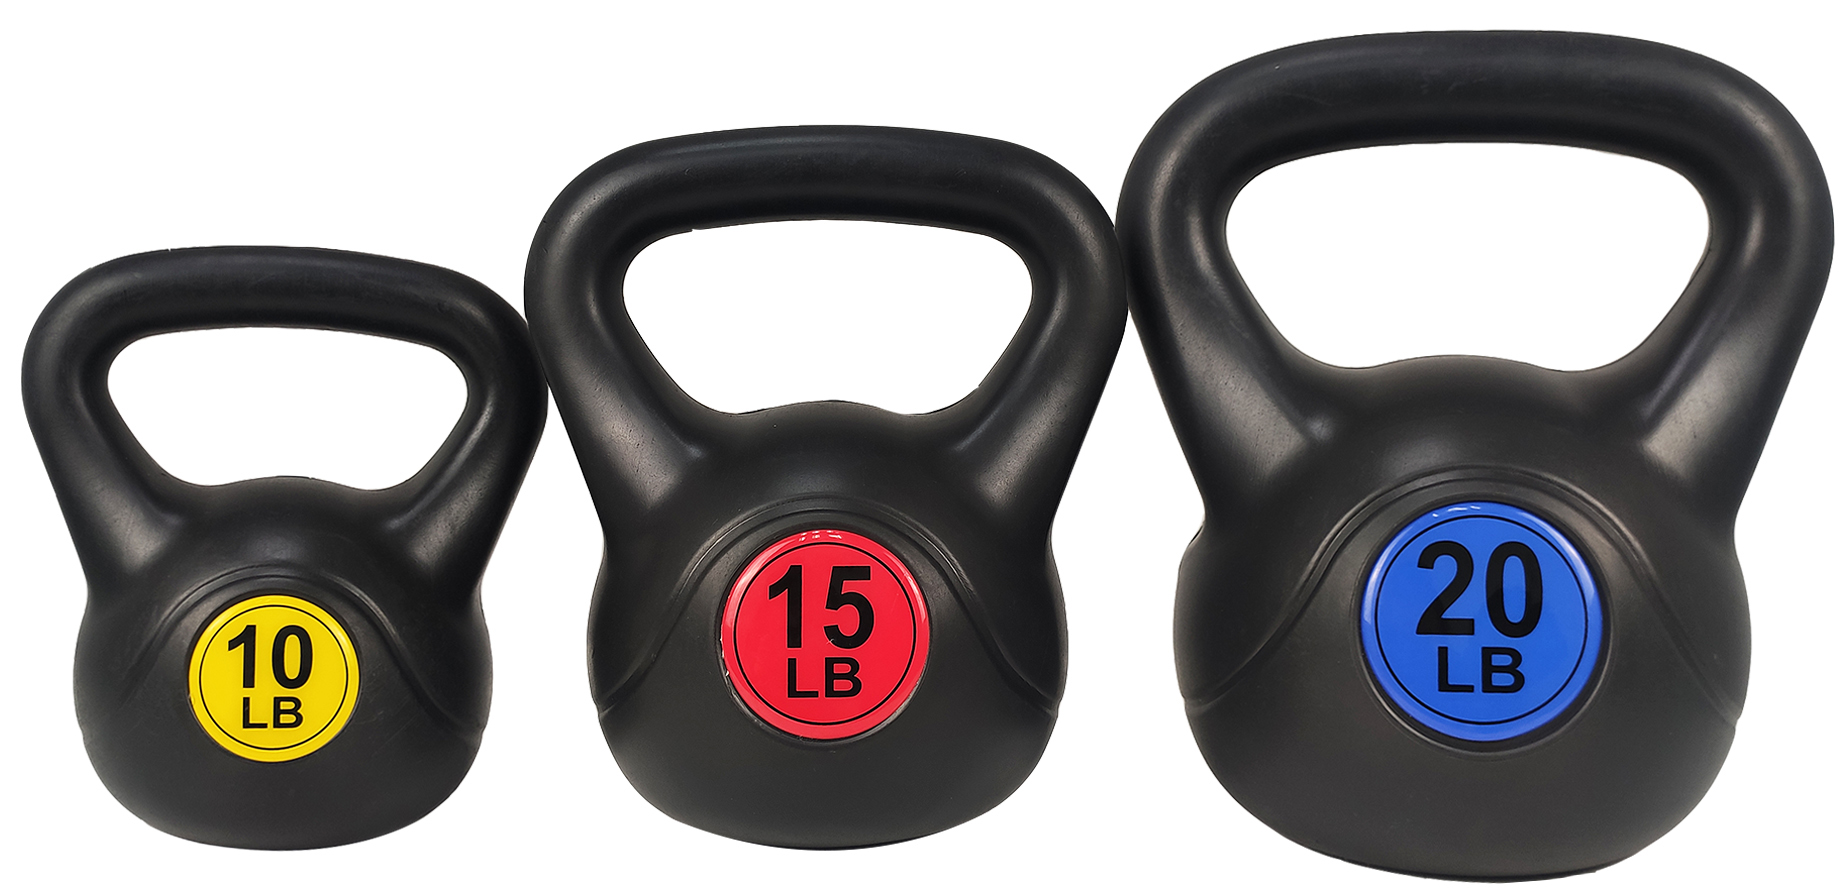 BalanceFrom Wide Grip Kettlebell Exercise Fitness Weight Set, 3-Pieces: 10lb, 15lb and 20lb Kettlebells - image 1 of 6